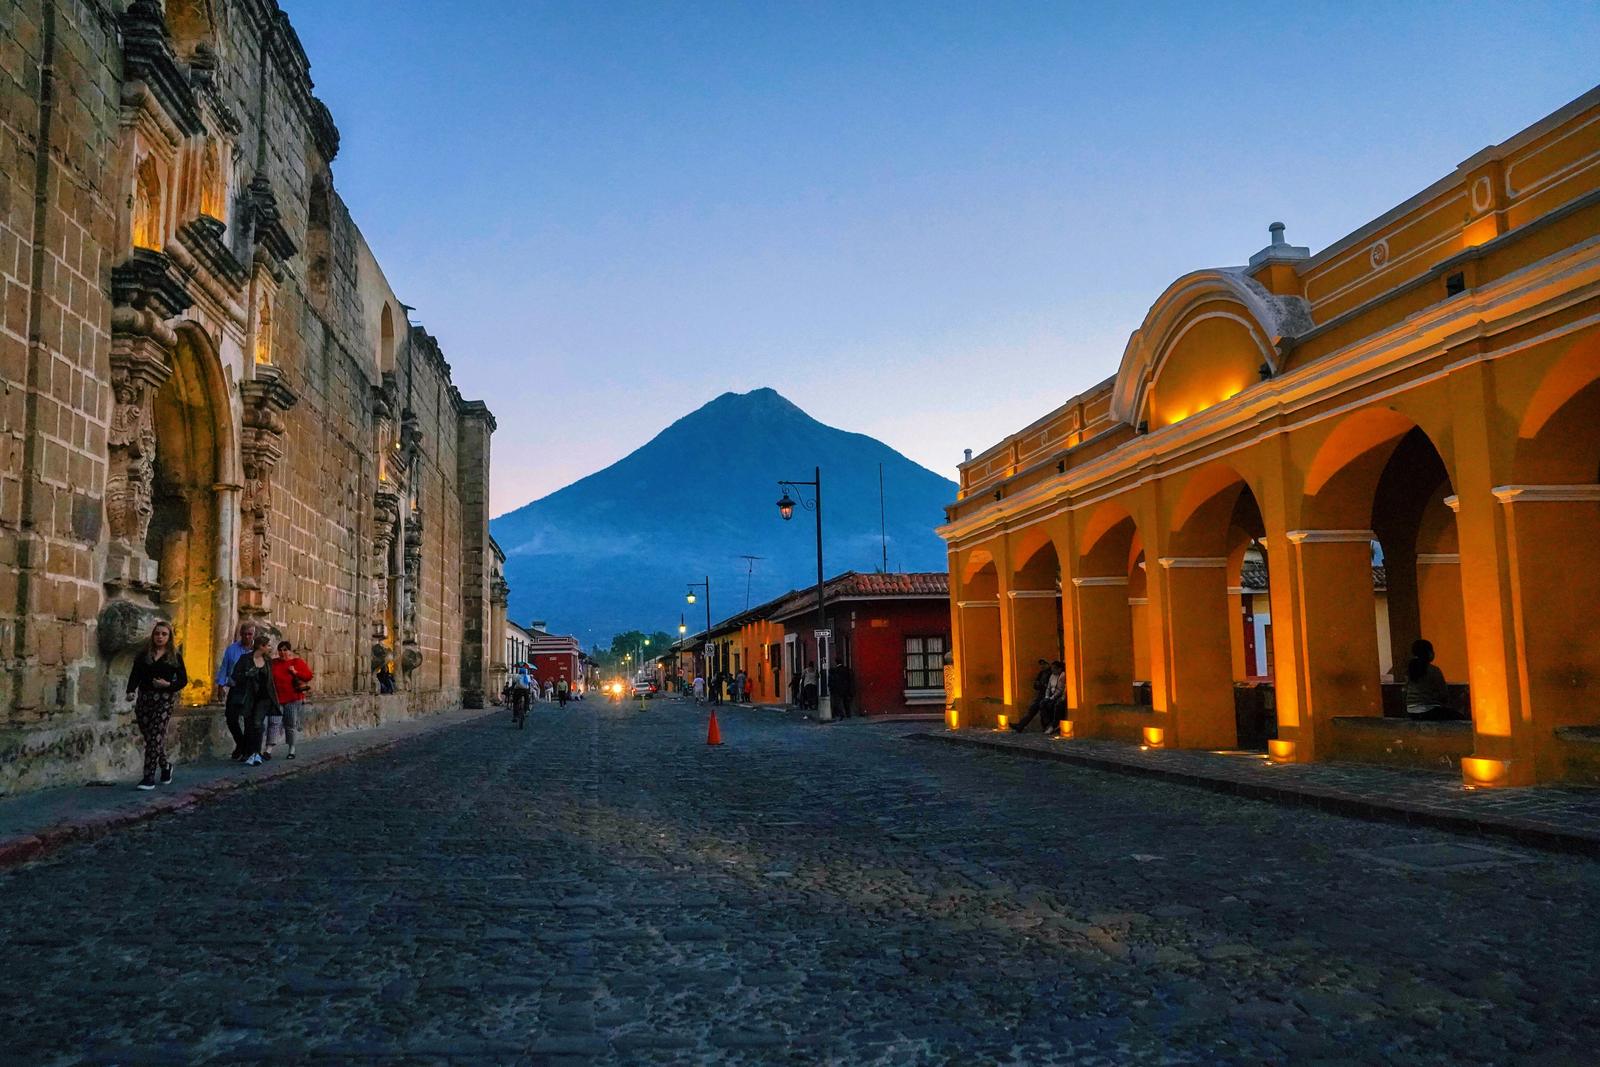 Here Are 24 Glorious Natural Attractions – Can You Match Them to Their Country? Guatemala